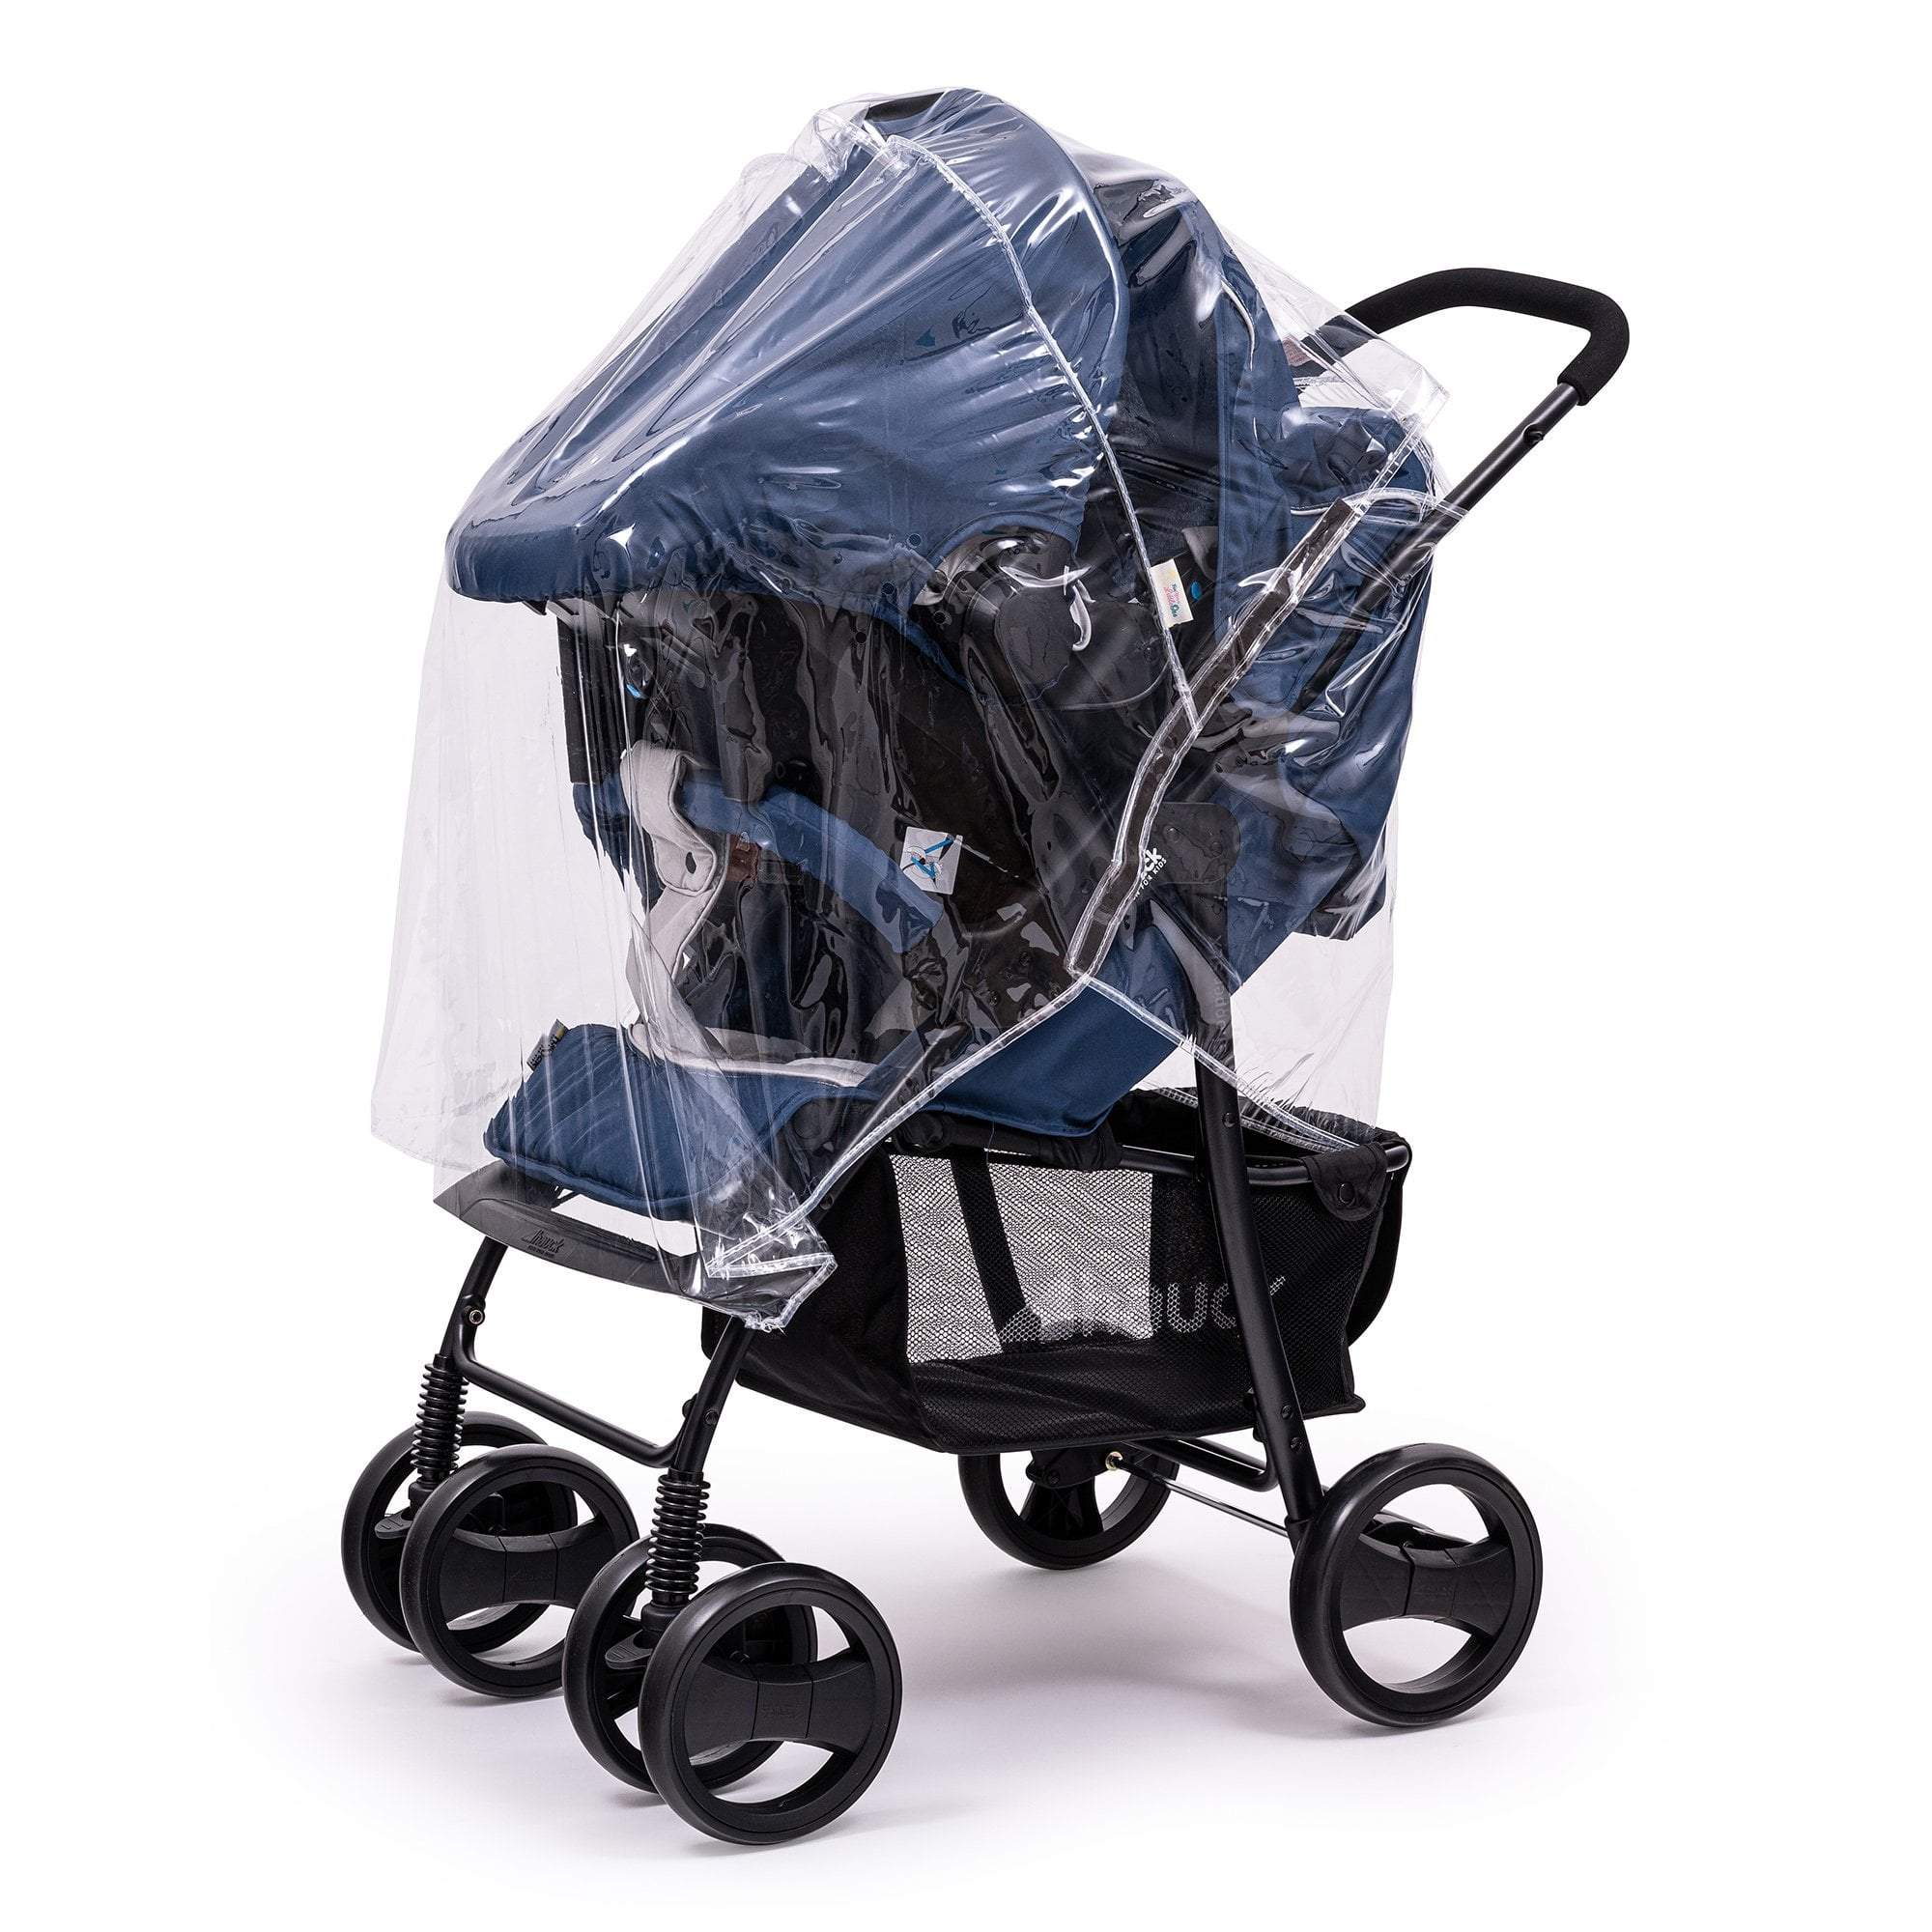 Travel System Raincover Compatible with Little Shield - Fits All Models -  | For Your Little One